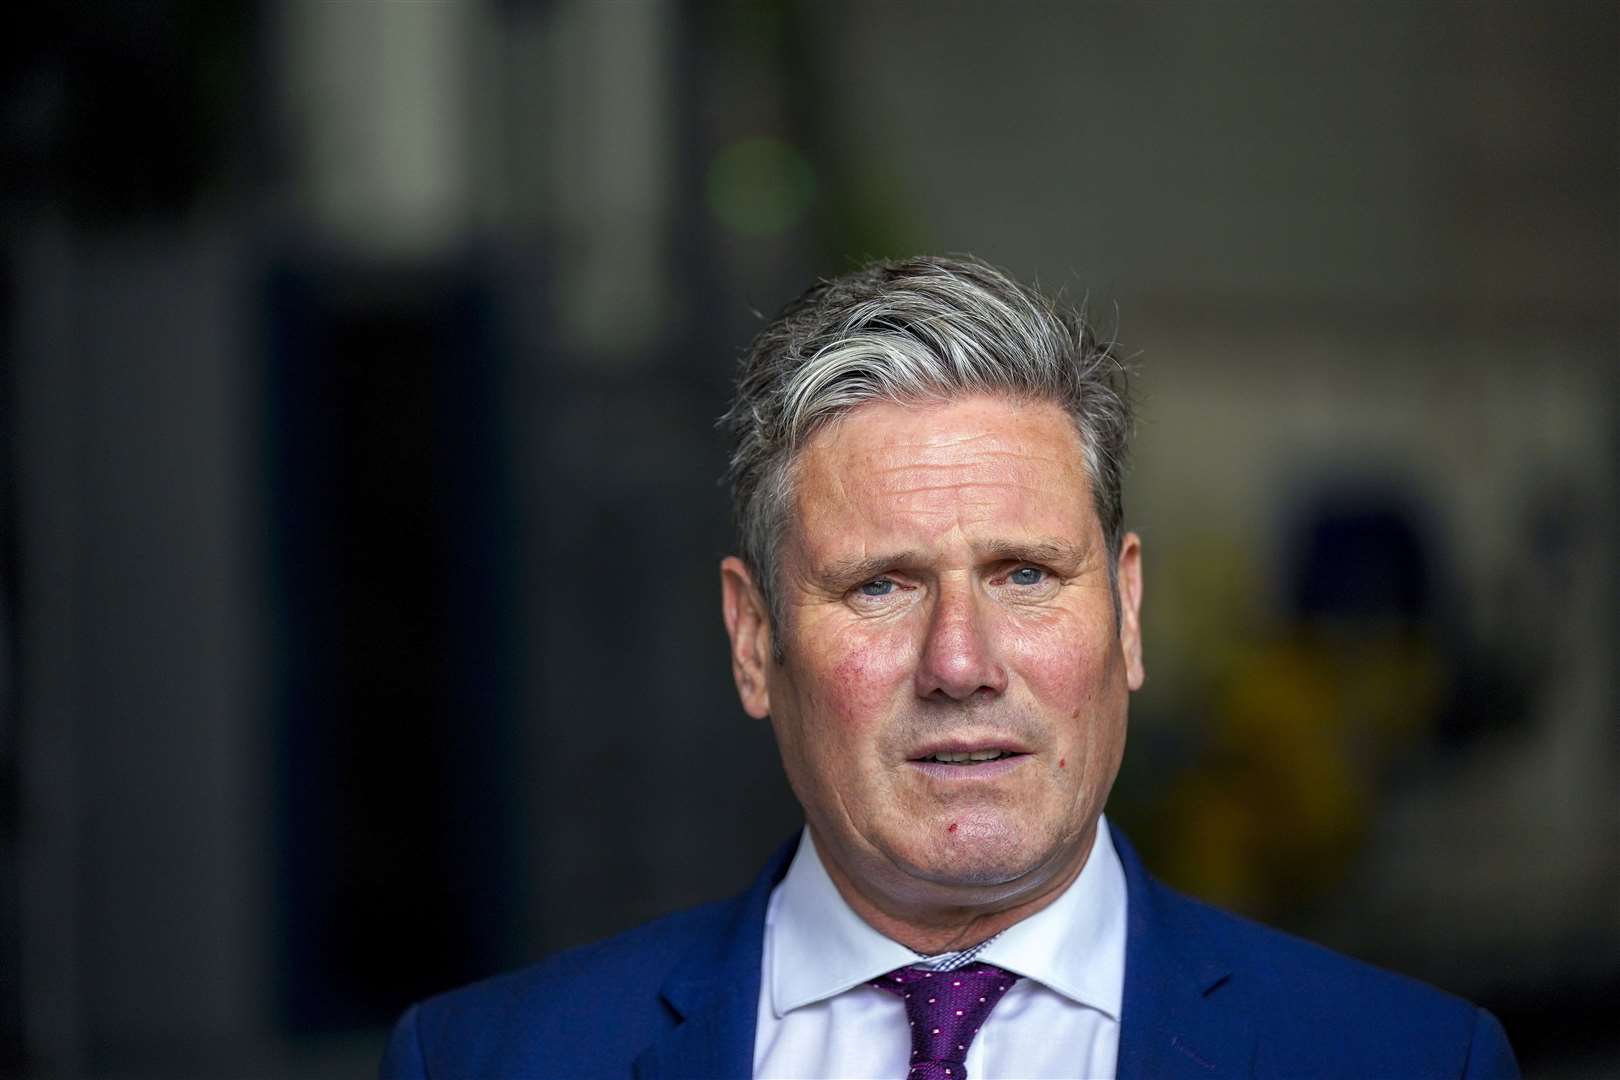 A loss in Batley and Spen is likely to put more pressure on the Labour leader Sir Keir Starmer (Steve Parsons/PA)